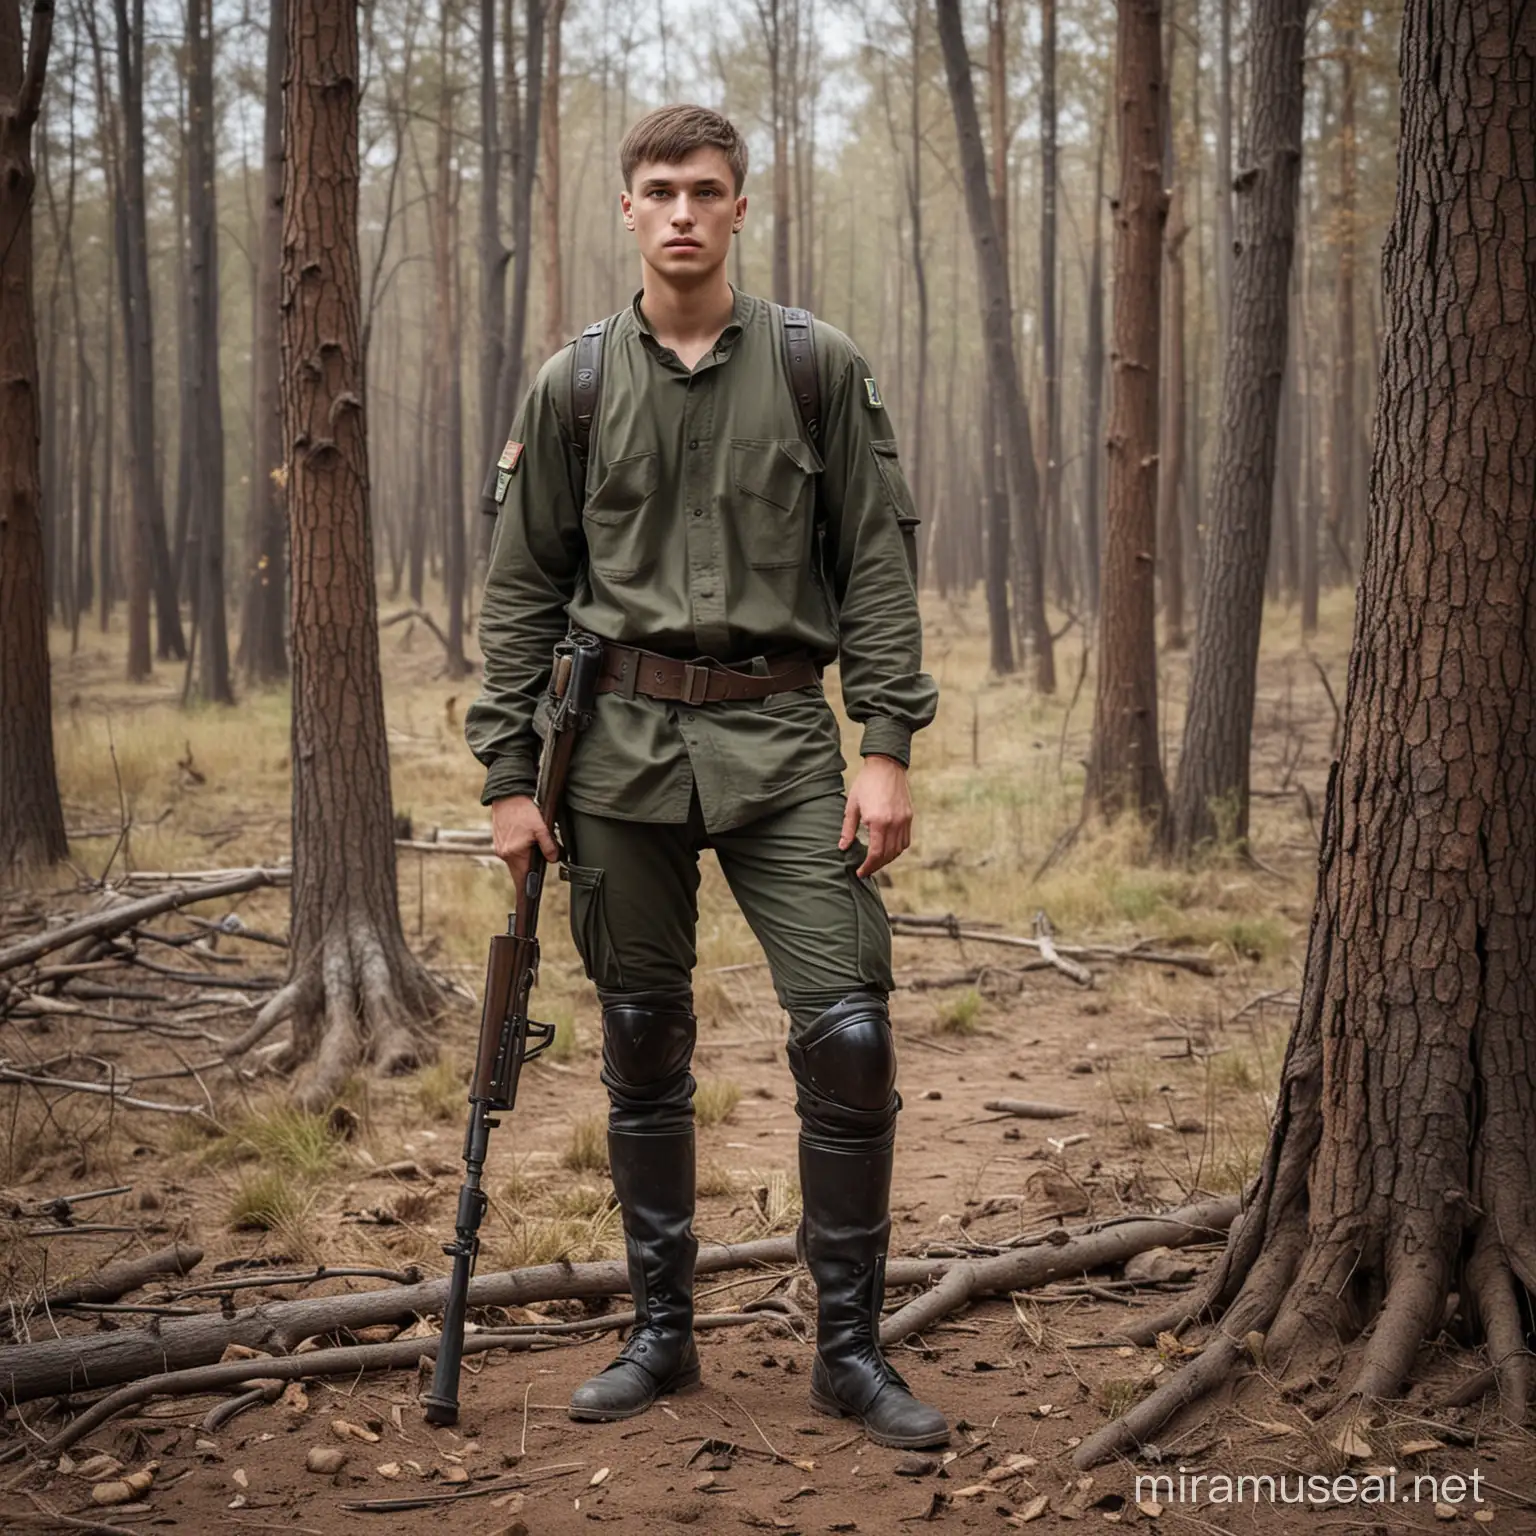 Ukrainian Man with Prosthetic Leg Engages in Forest Gunfight